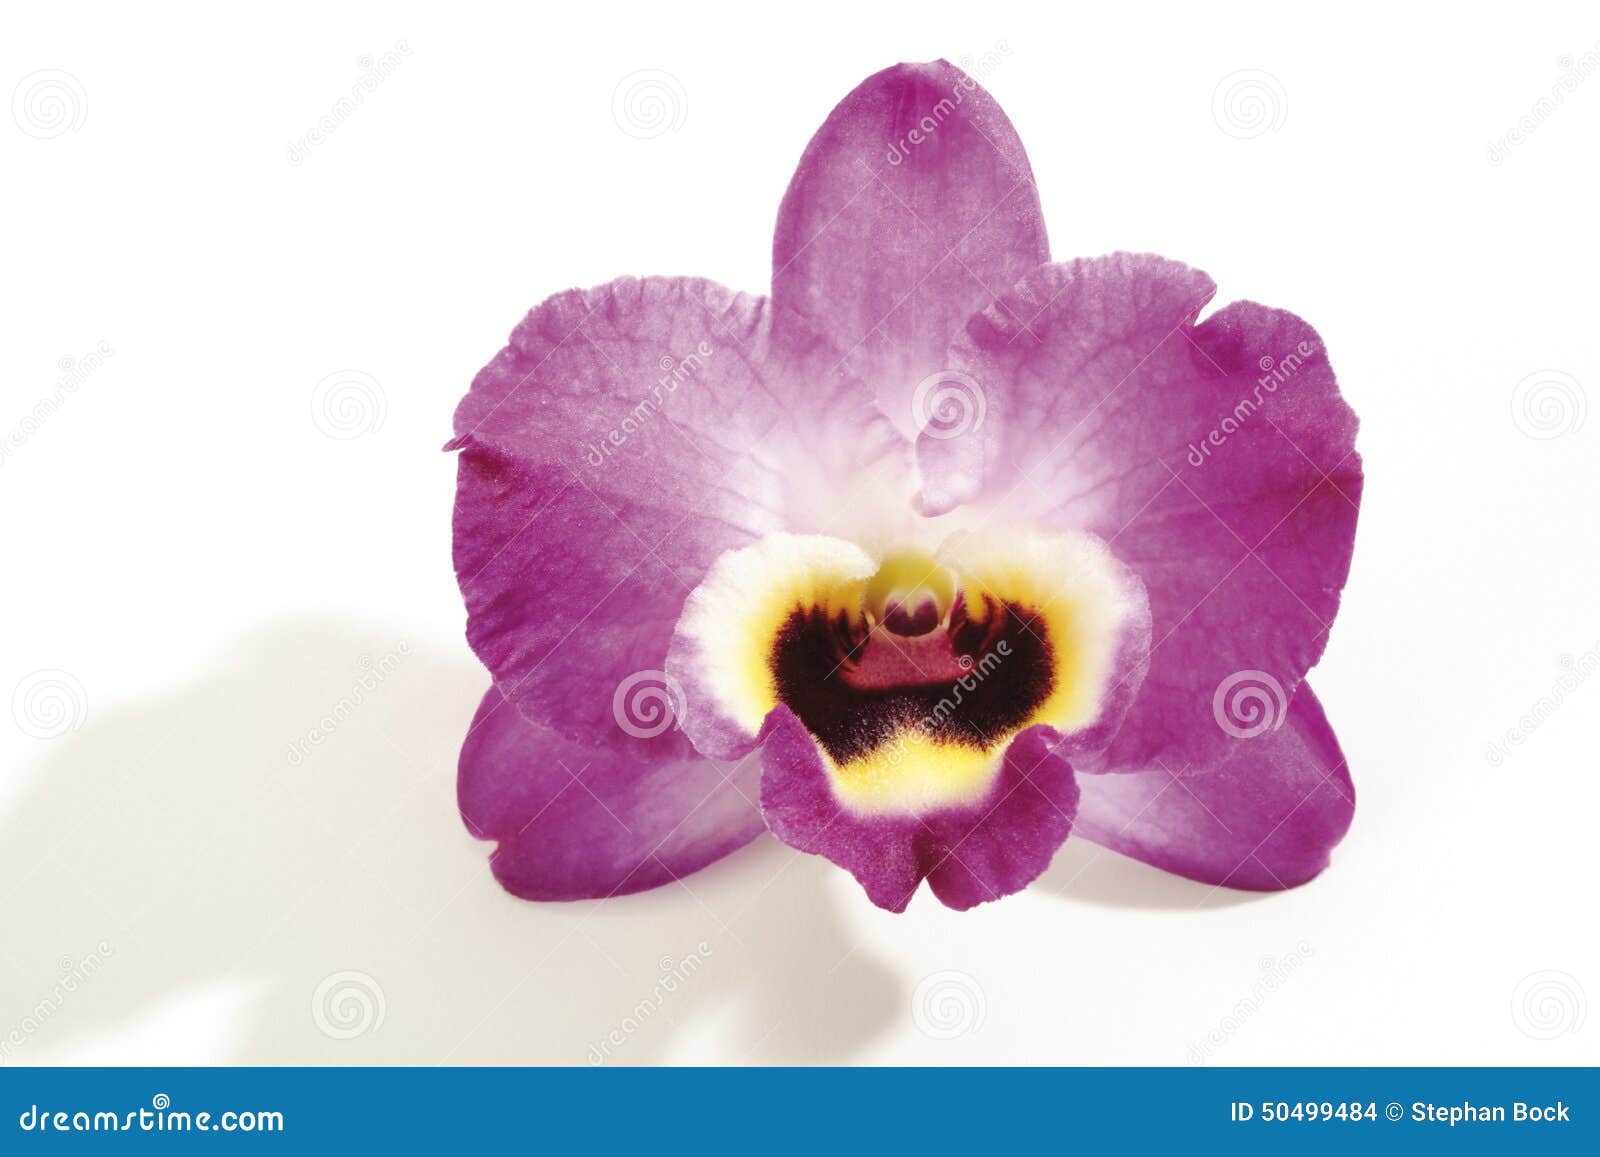 orchid blossom (orchidaceae), close-up